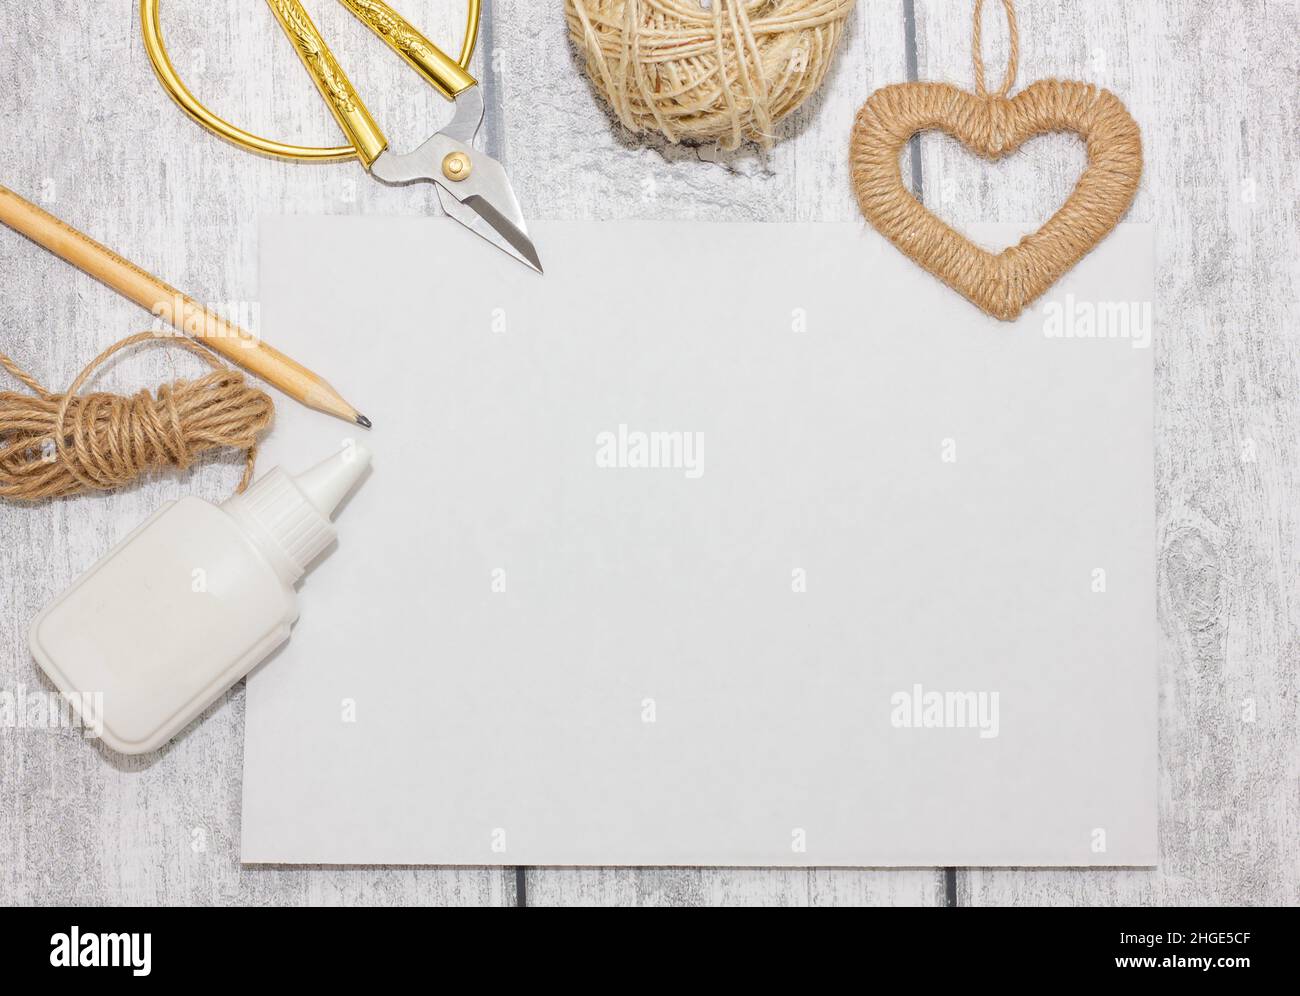 make a heart out of jute rope for the holiday of valentine's day. the concept of gifts, activities with children. Stock Photo